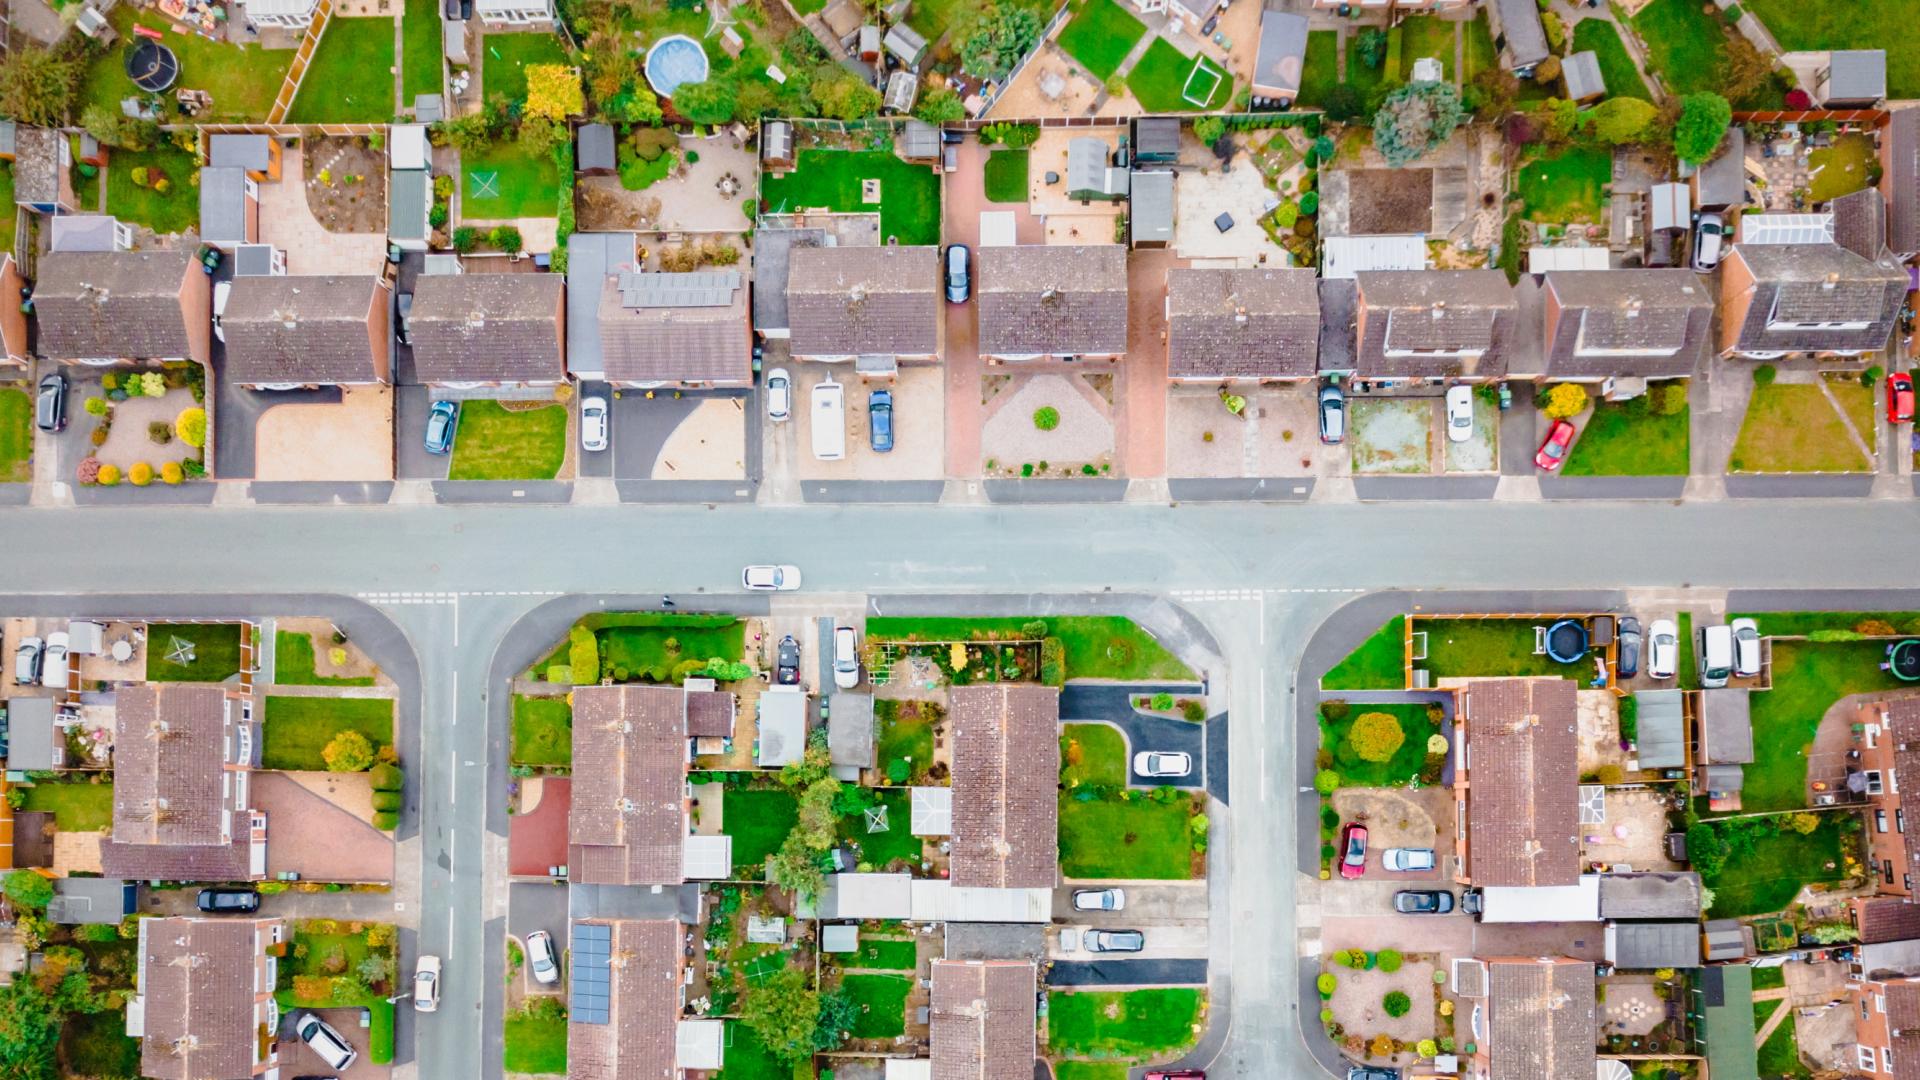 Image of a neighbourhood from above